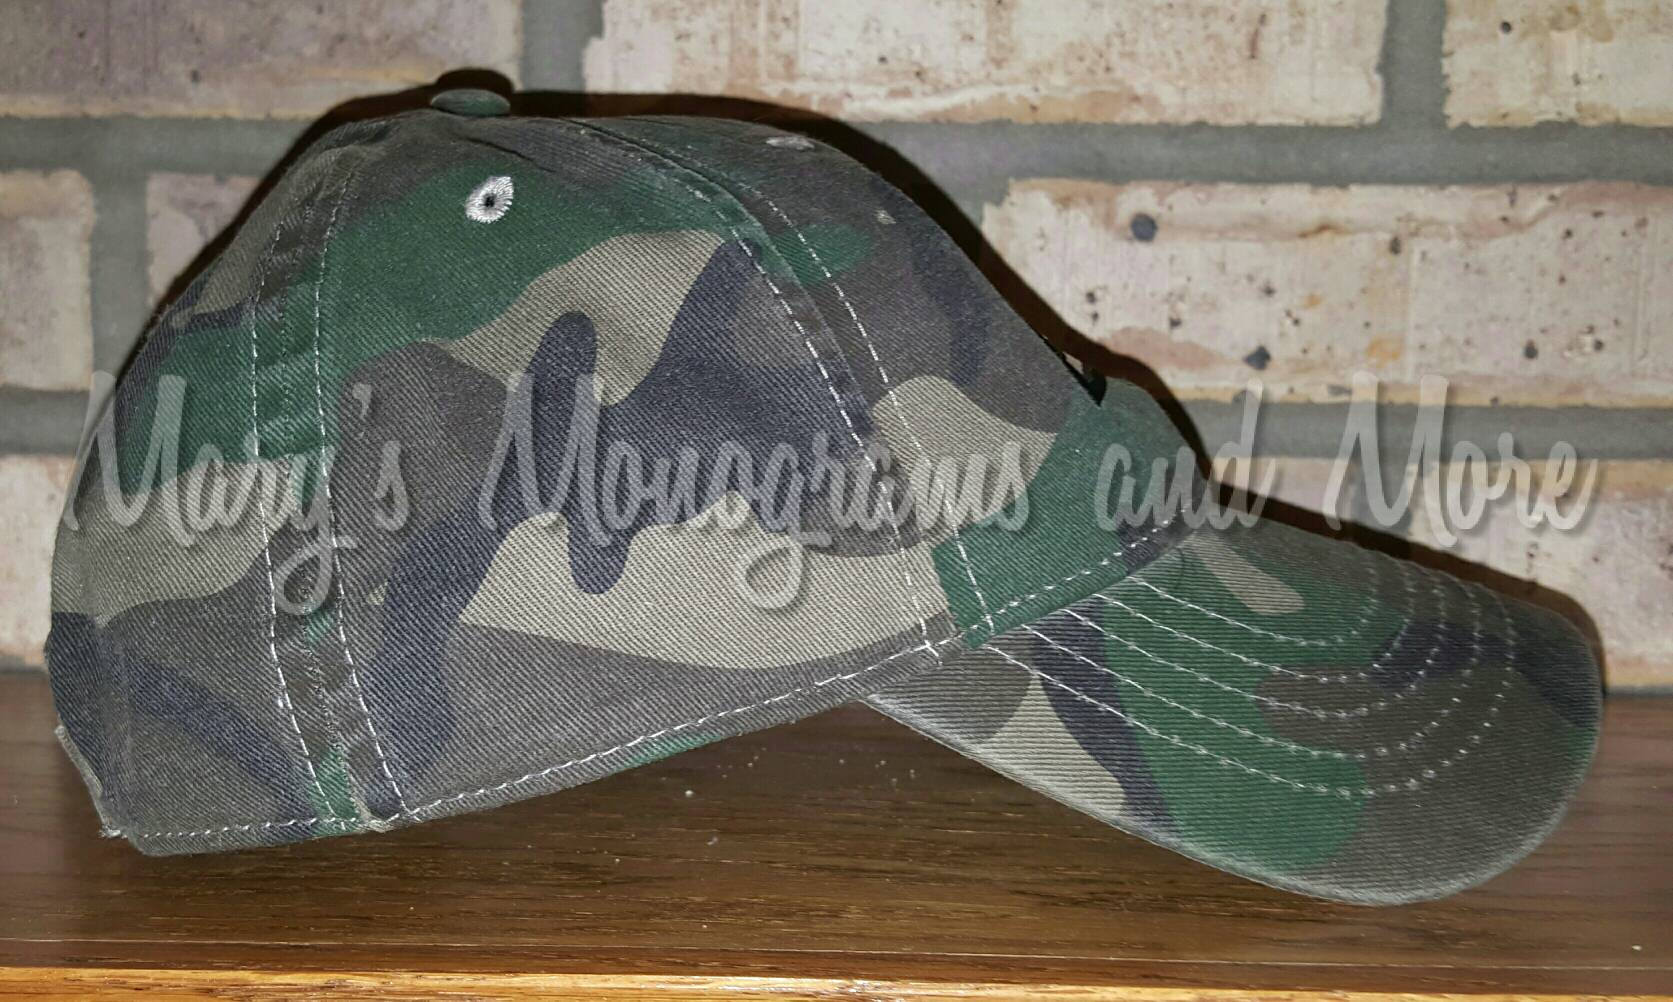 Thin Blue Line American Flag Baseball Hat, Embroidered Camo Police Officer Cap, Military, Back the Blue, Law Enforcement, Cop, Custom Hats